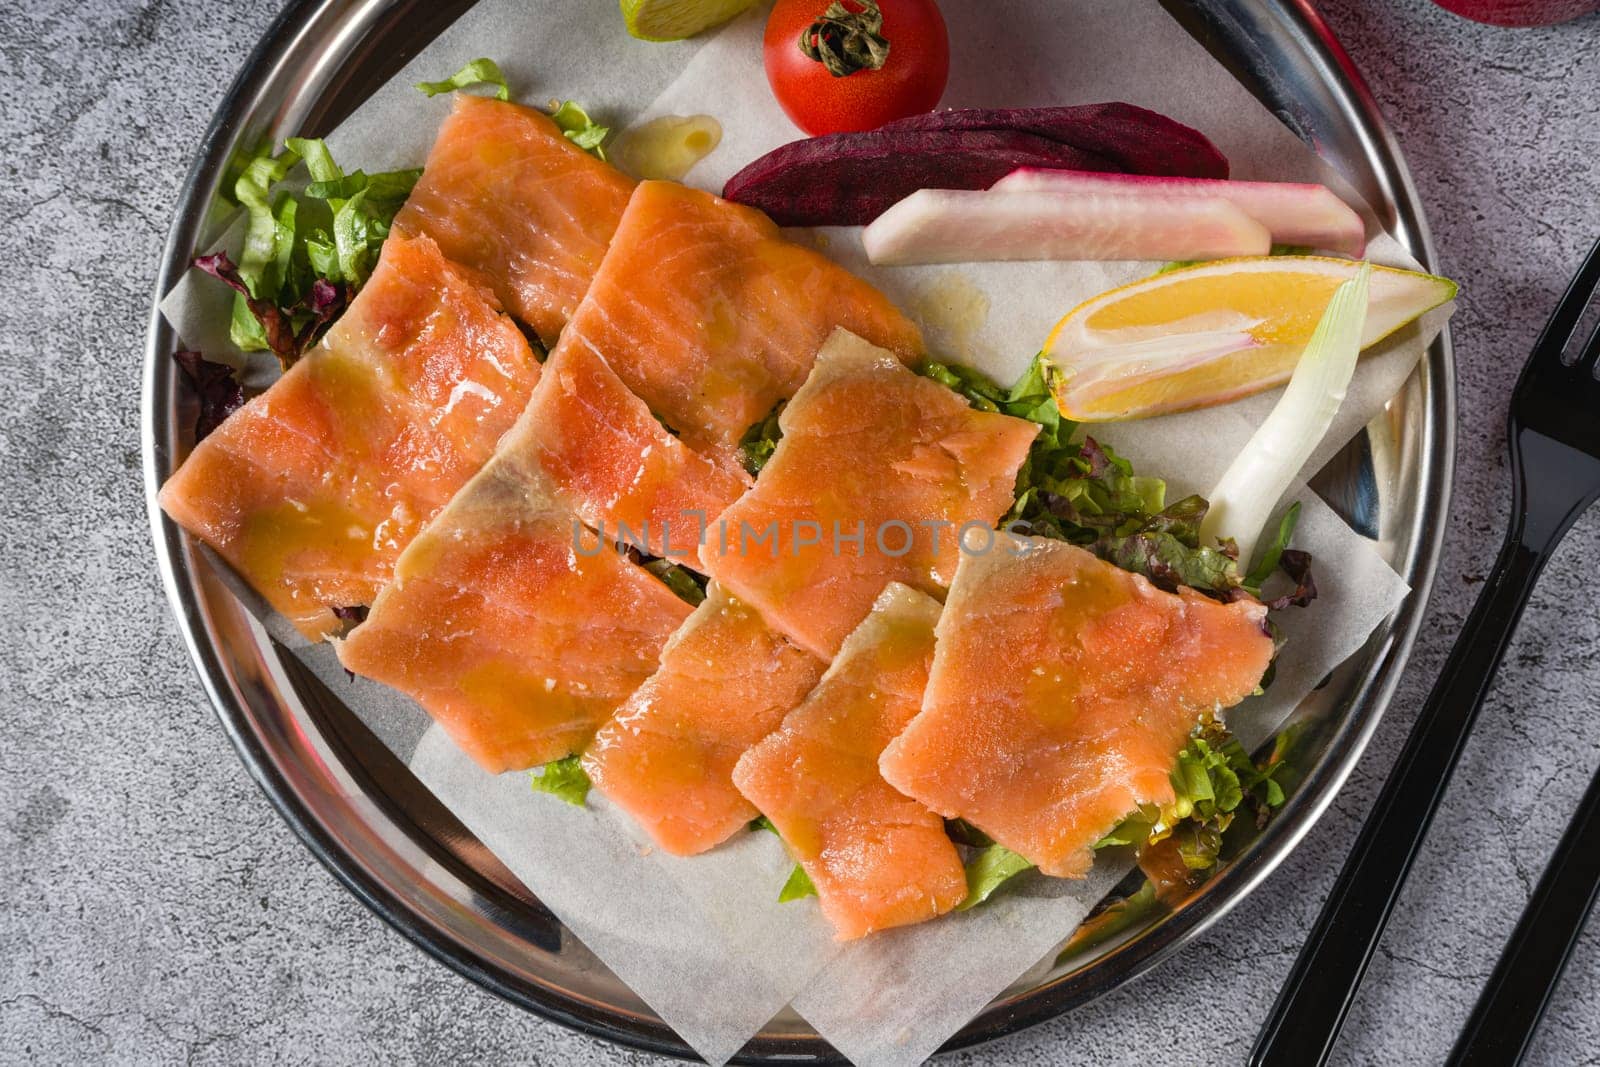 Smoked salmon with greens under it on a stone table